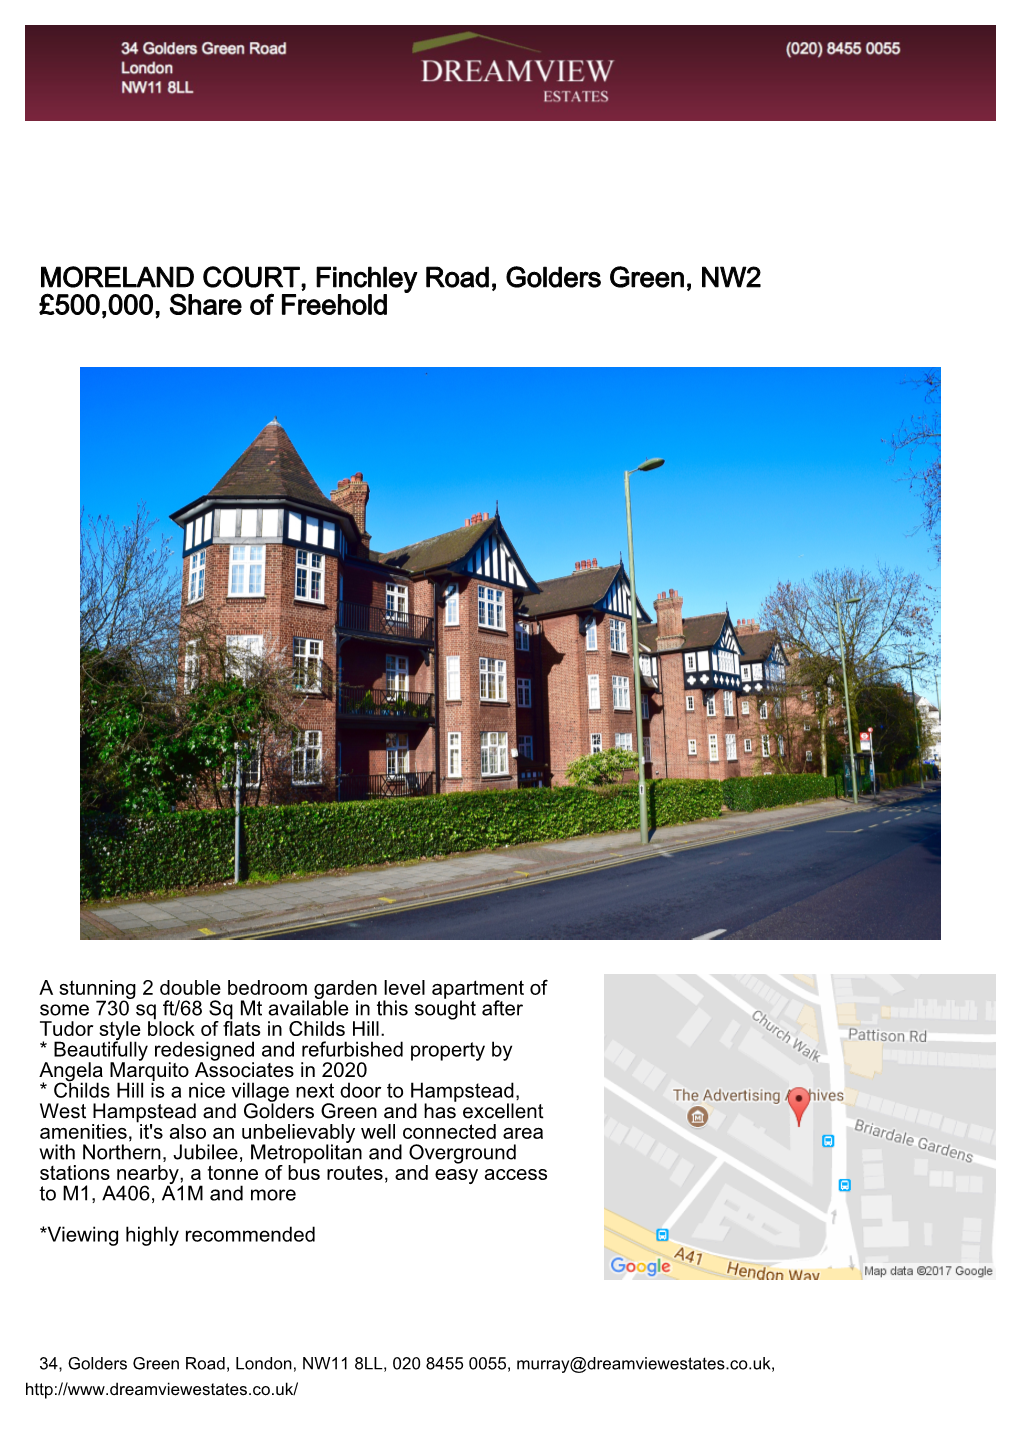 MORELAND COURT, Finchley Road, Golders Green, NW2 £500,000, Share of Freehold